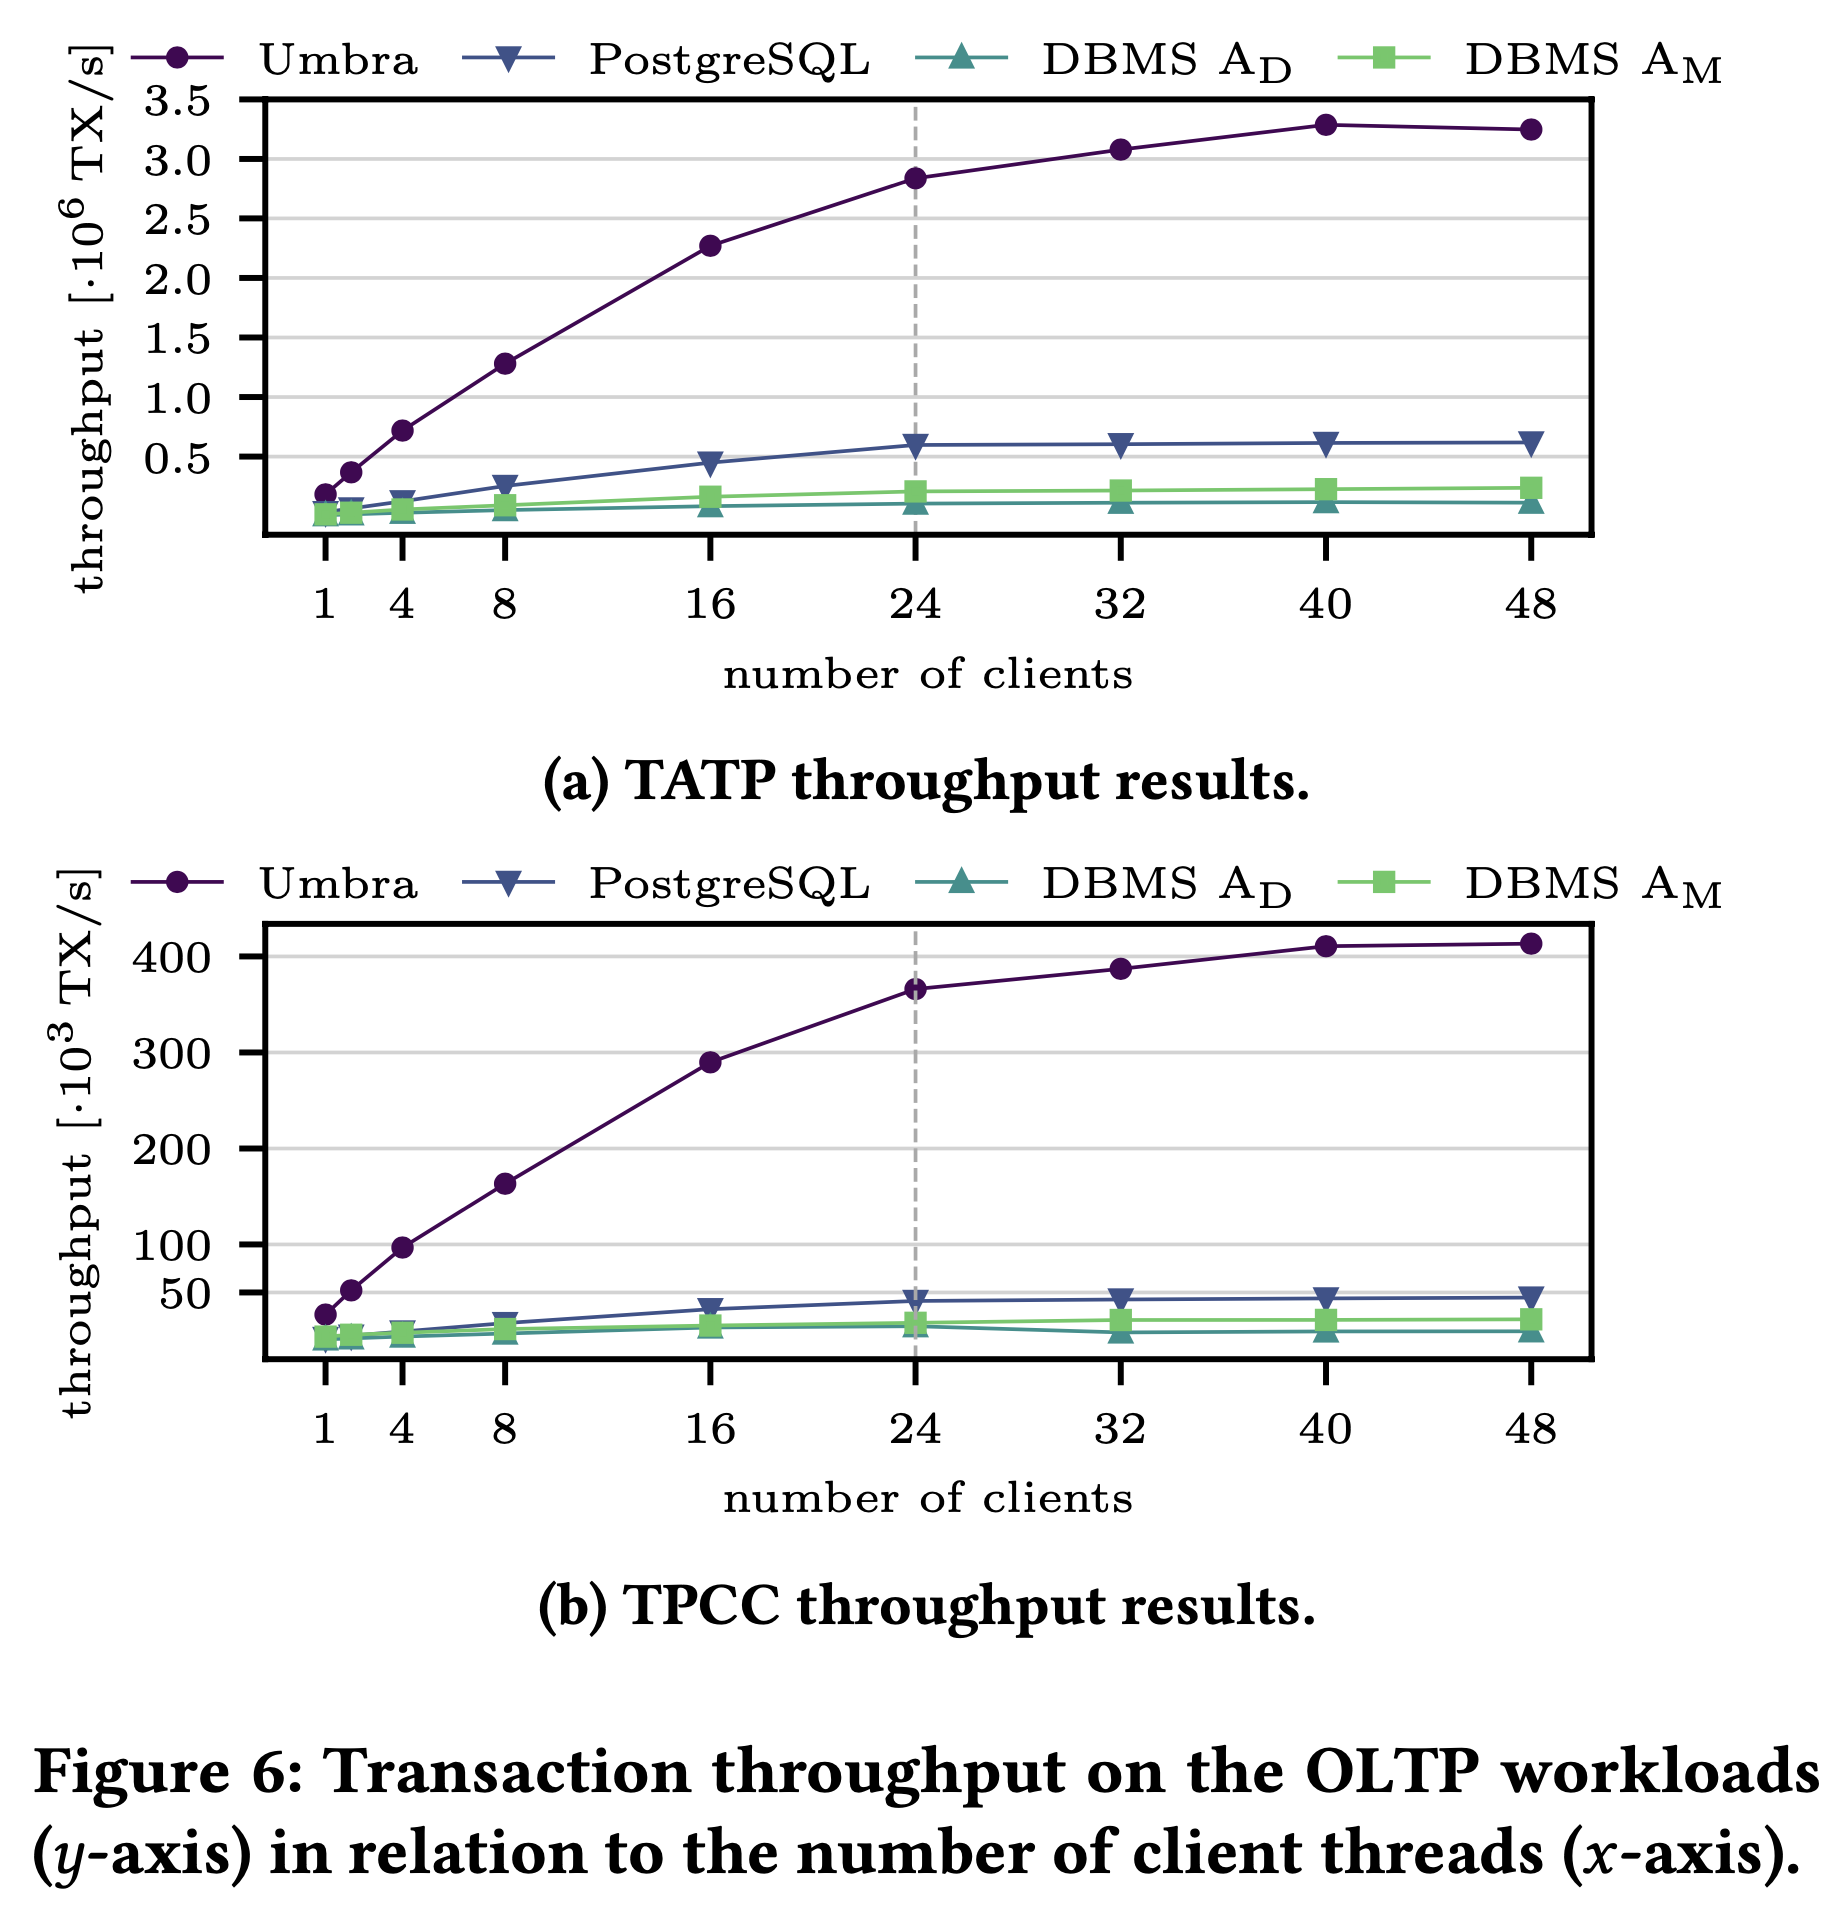 Figure 6: Transaction throughput on the OLTP workloads